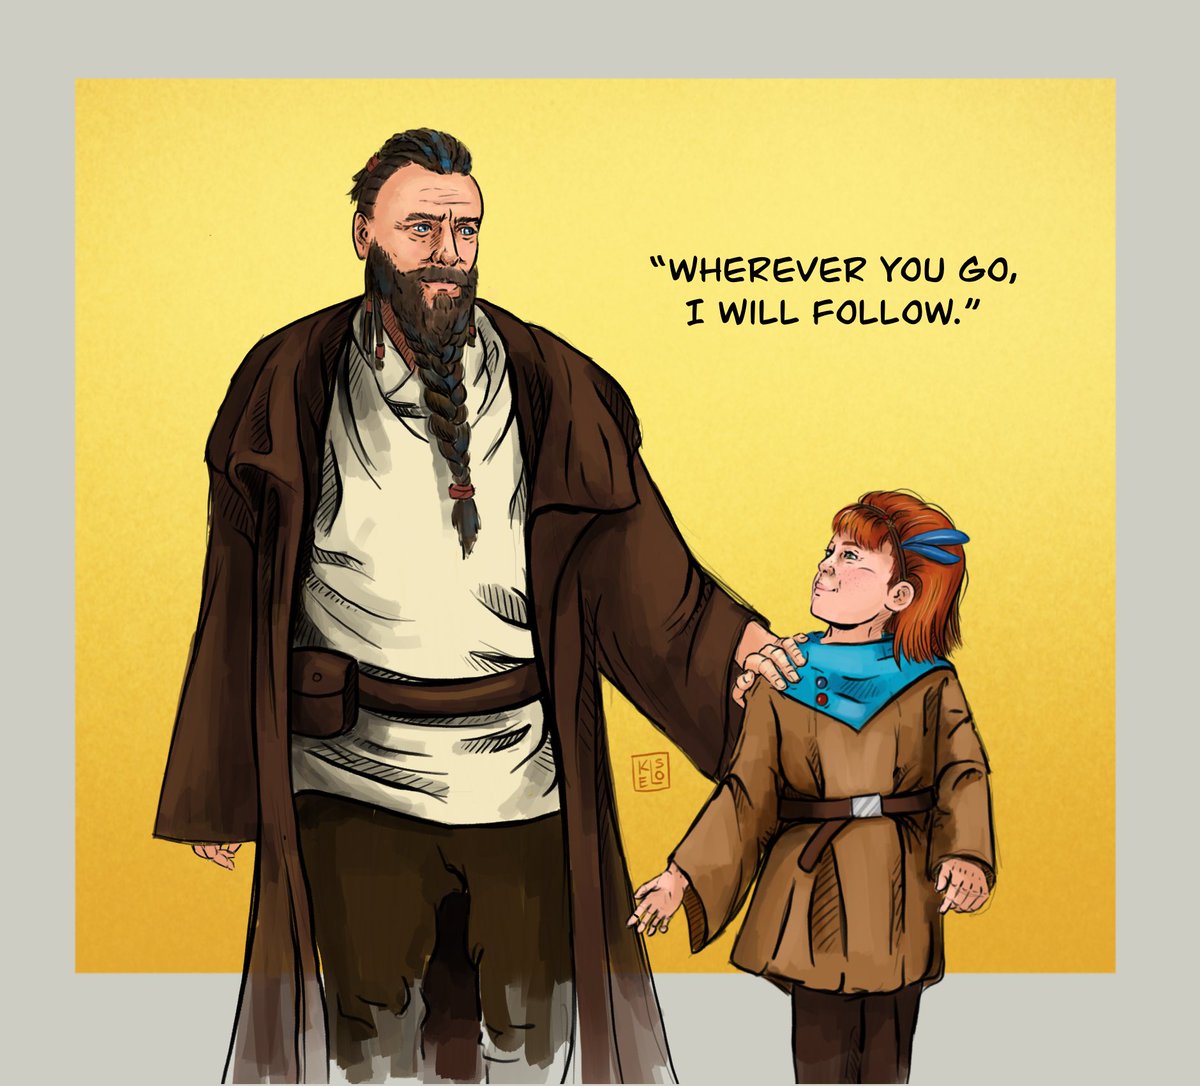 I didn’t get a chance to really flesh this one out, but I still love the idea of it. One more for the Horizon/Star Wars crossover. Rost and young #Aloy #MayThe4thBeWithYou #BeyondTheHorizon